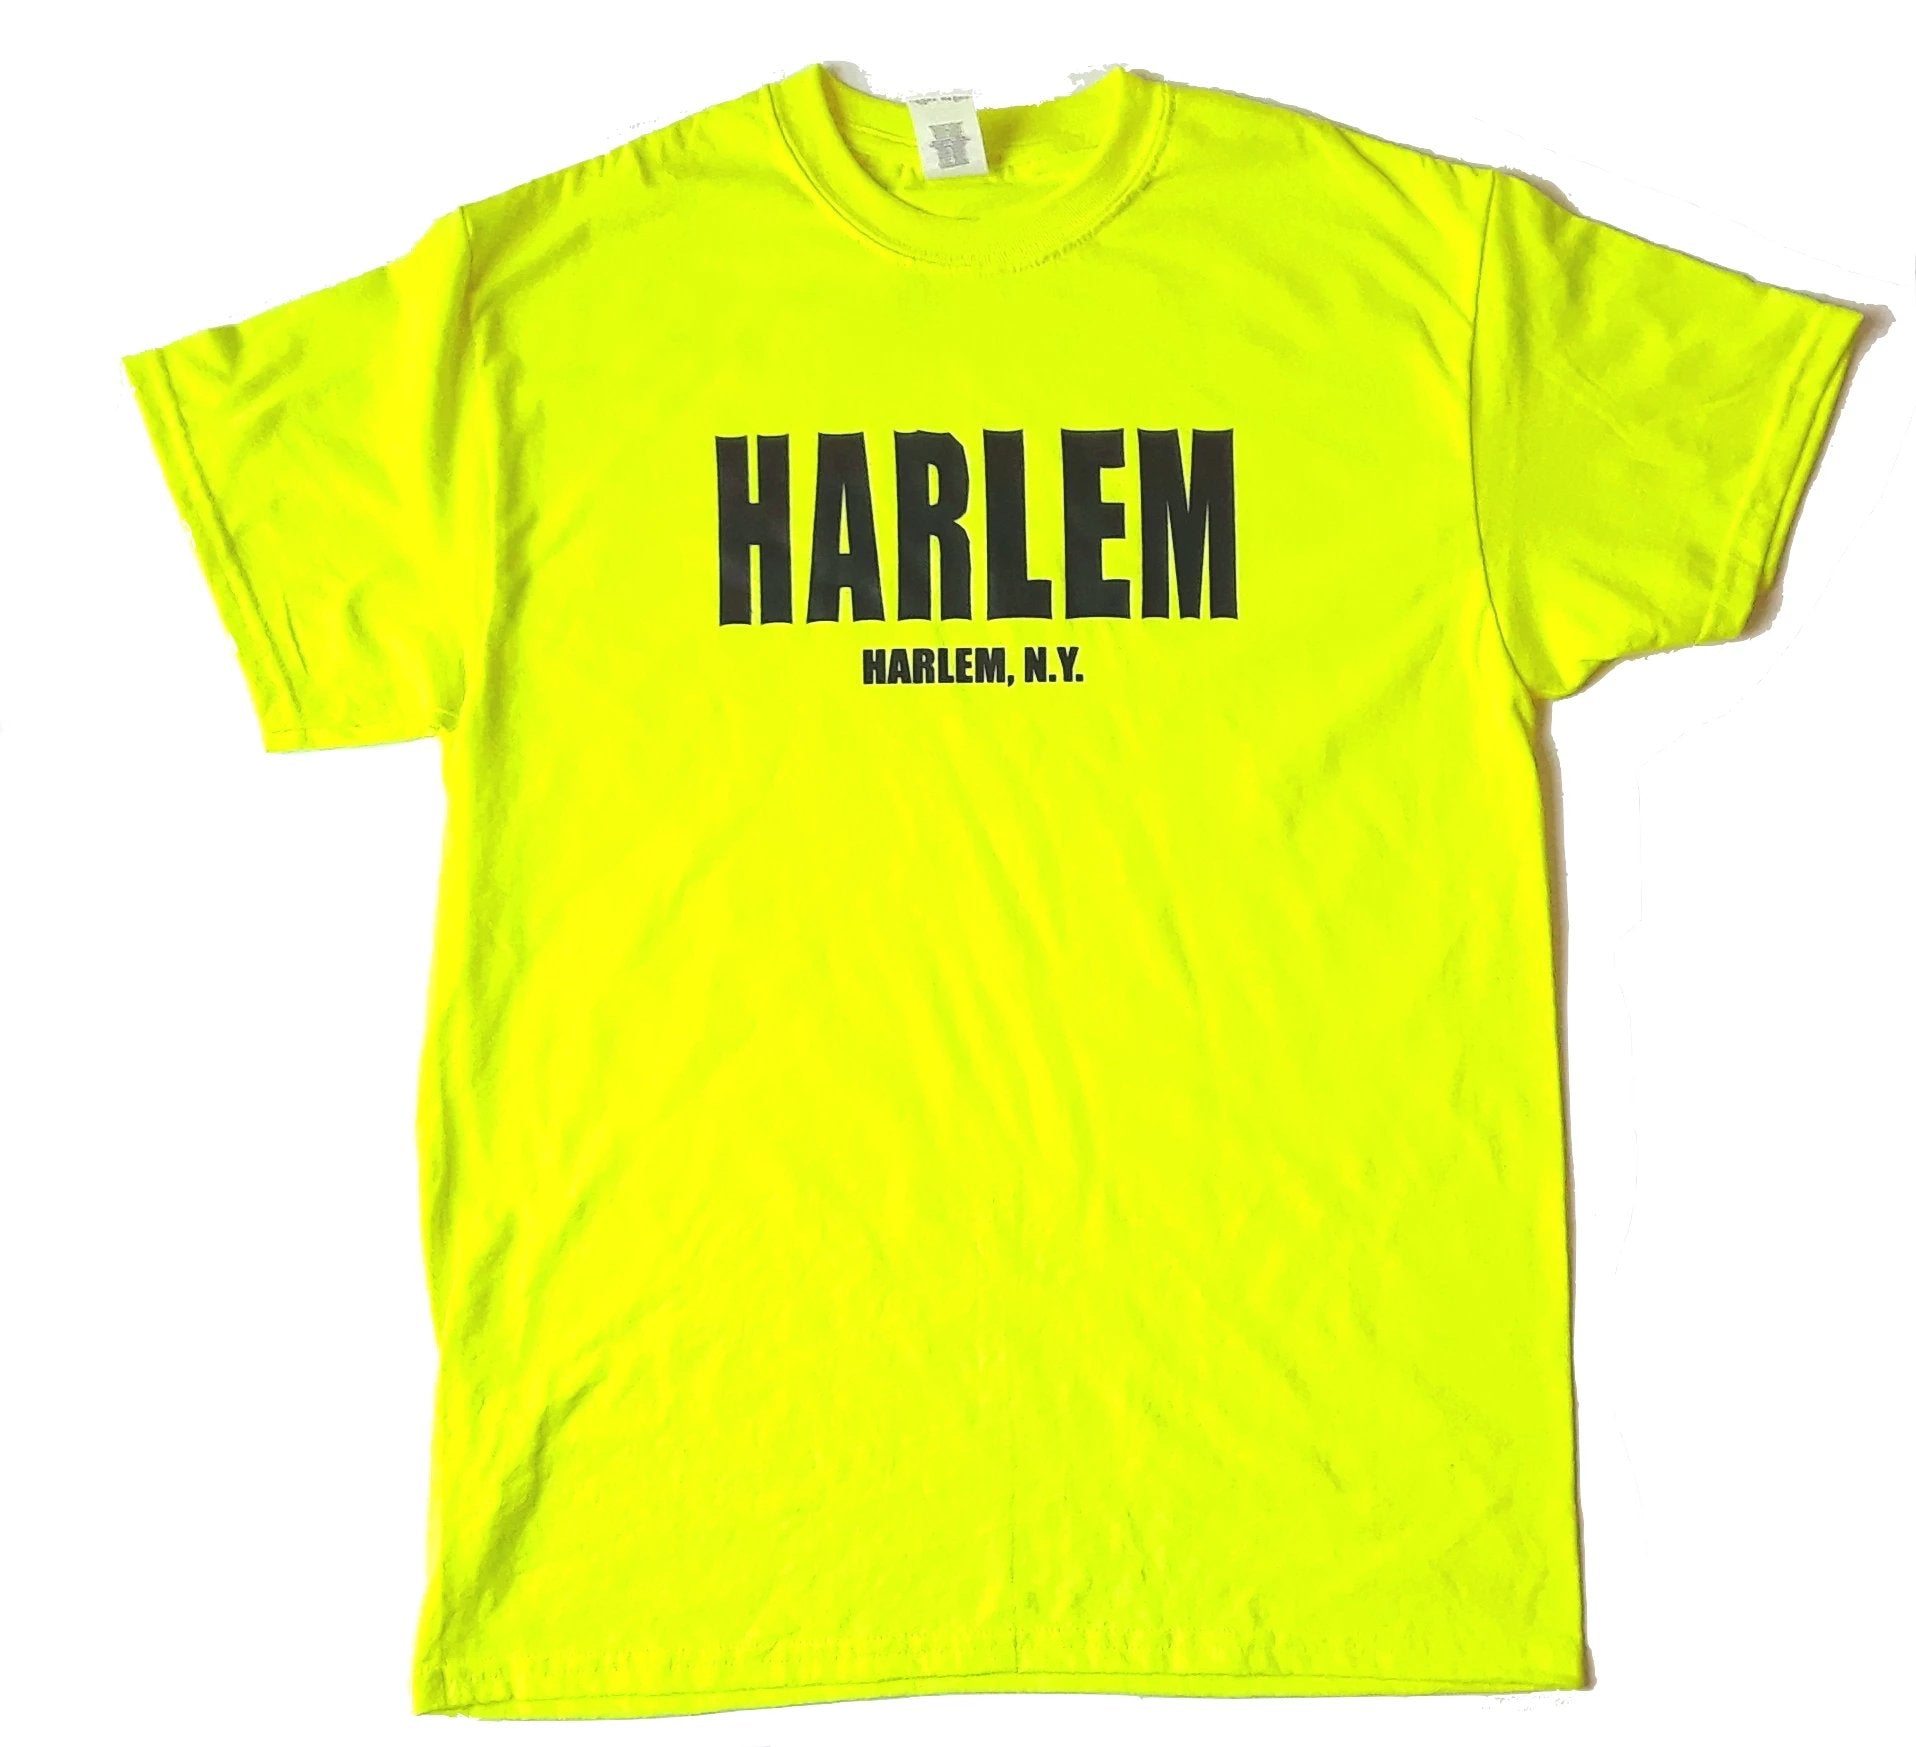 Harlem, N.Y.  T-shirts  Official - BUCALEANY